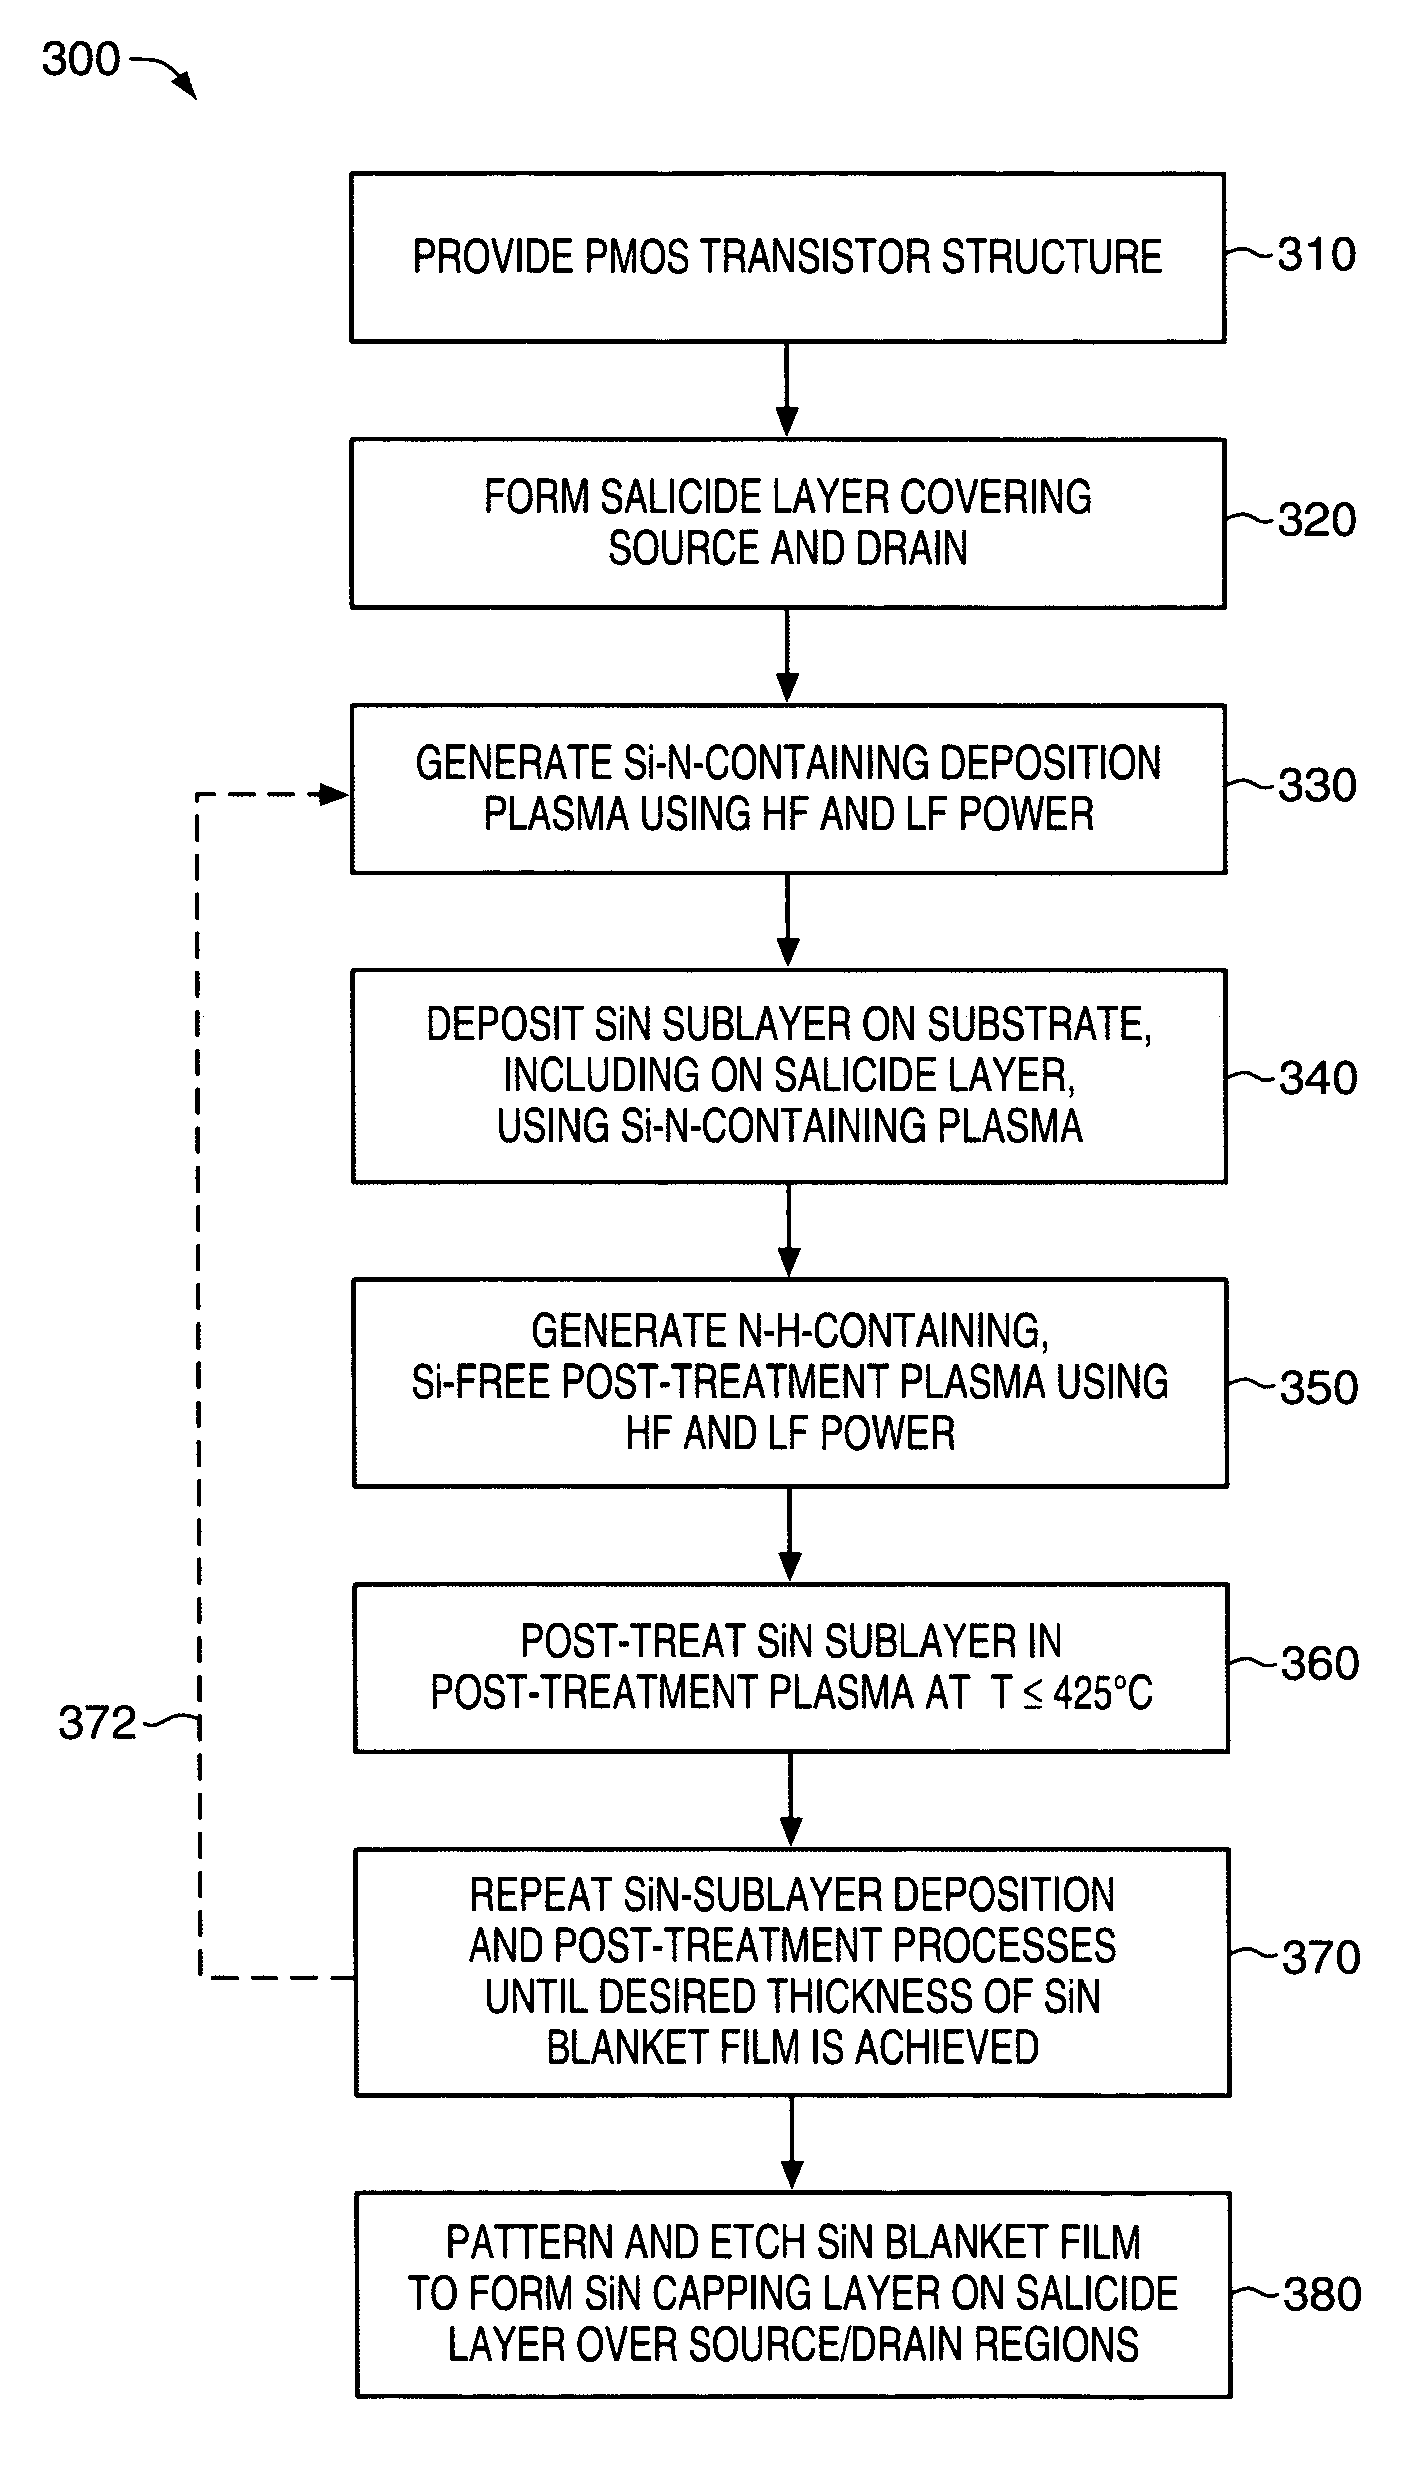 PMOS transistor with compressive dielectric capping layer